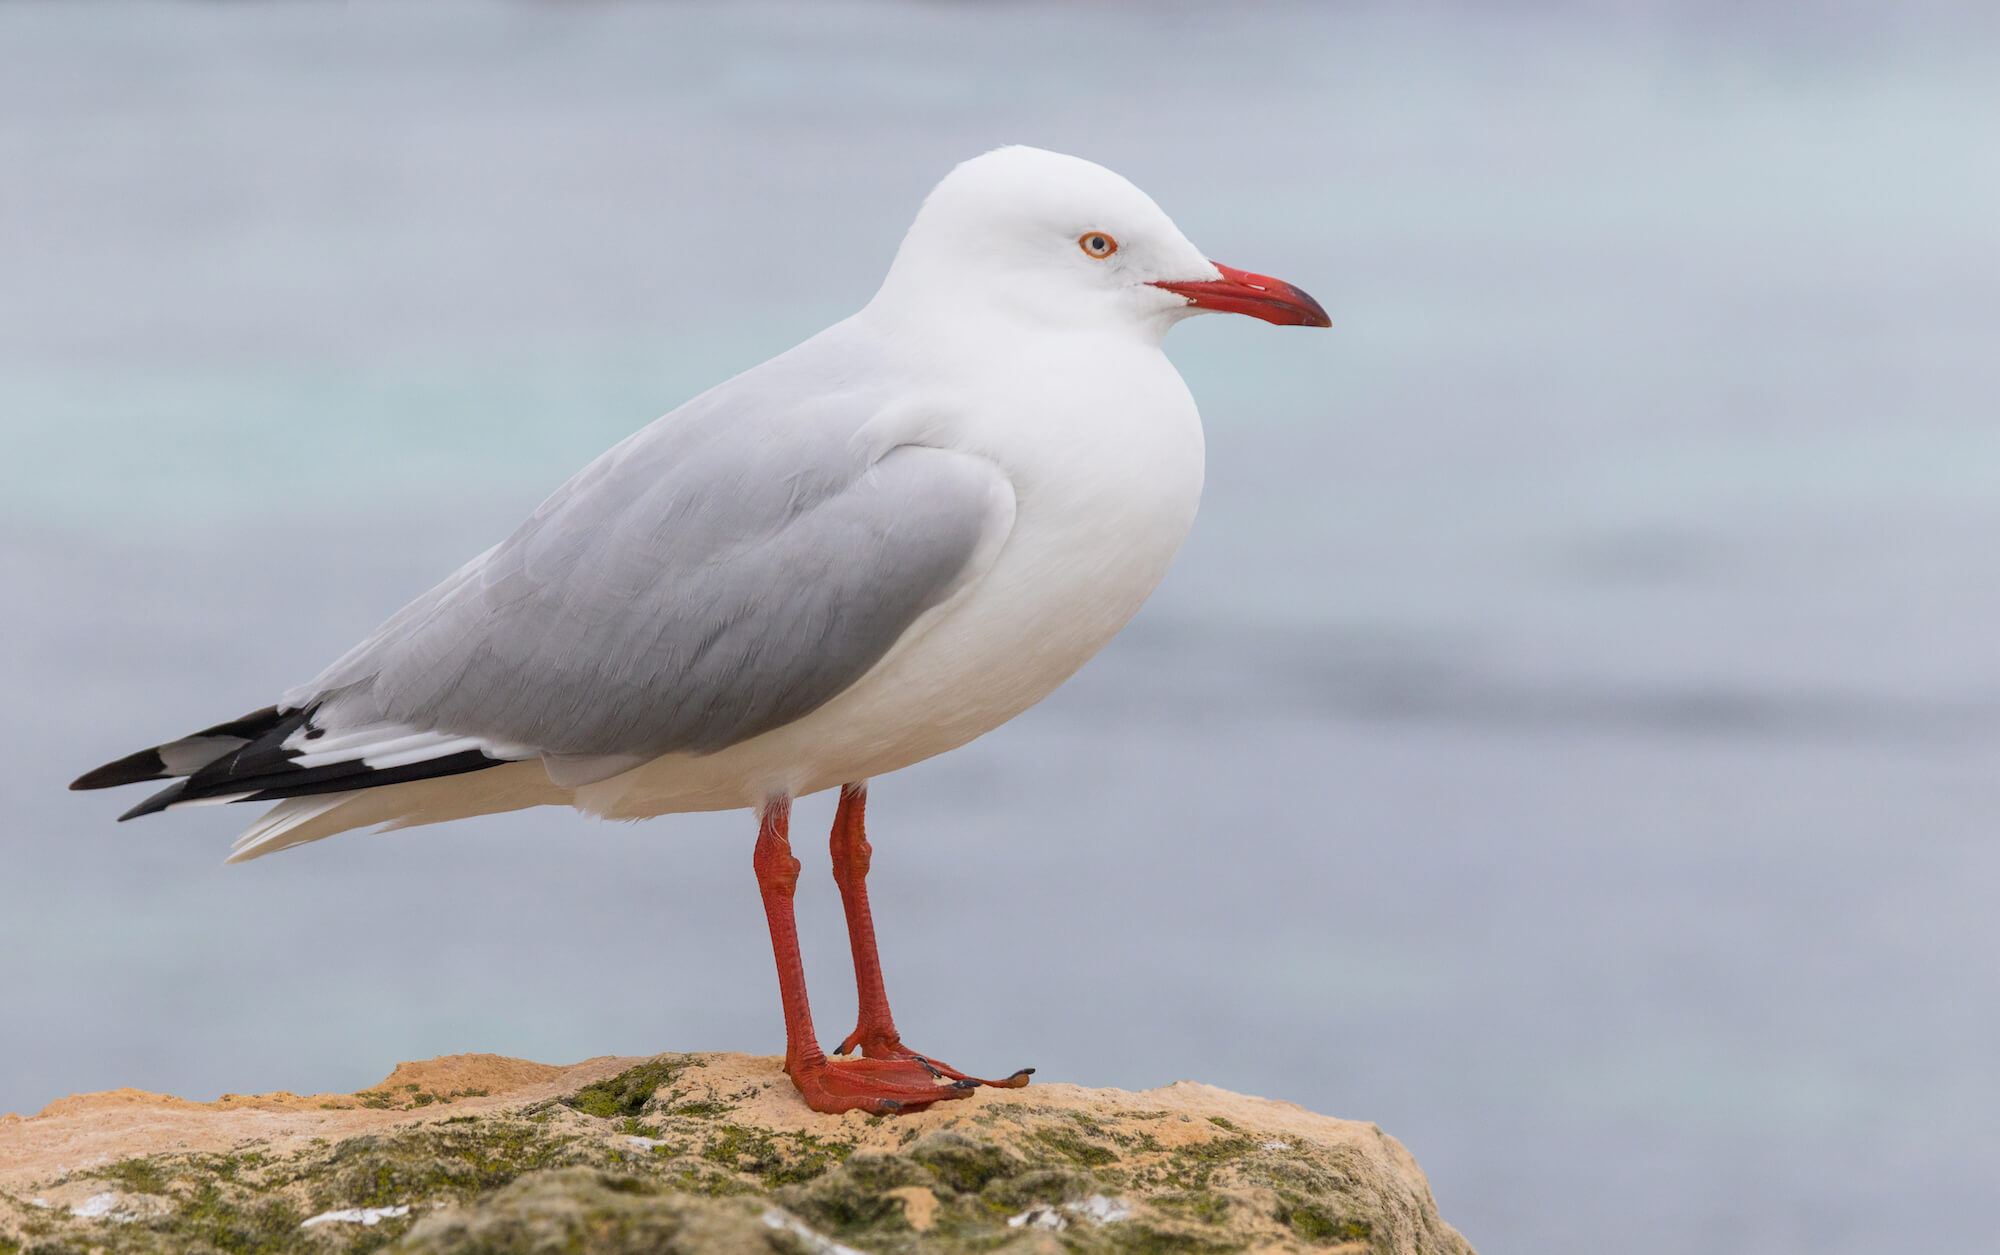 Silver Gull standing on a rock